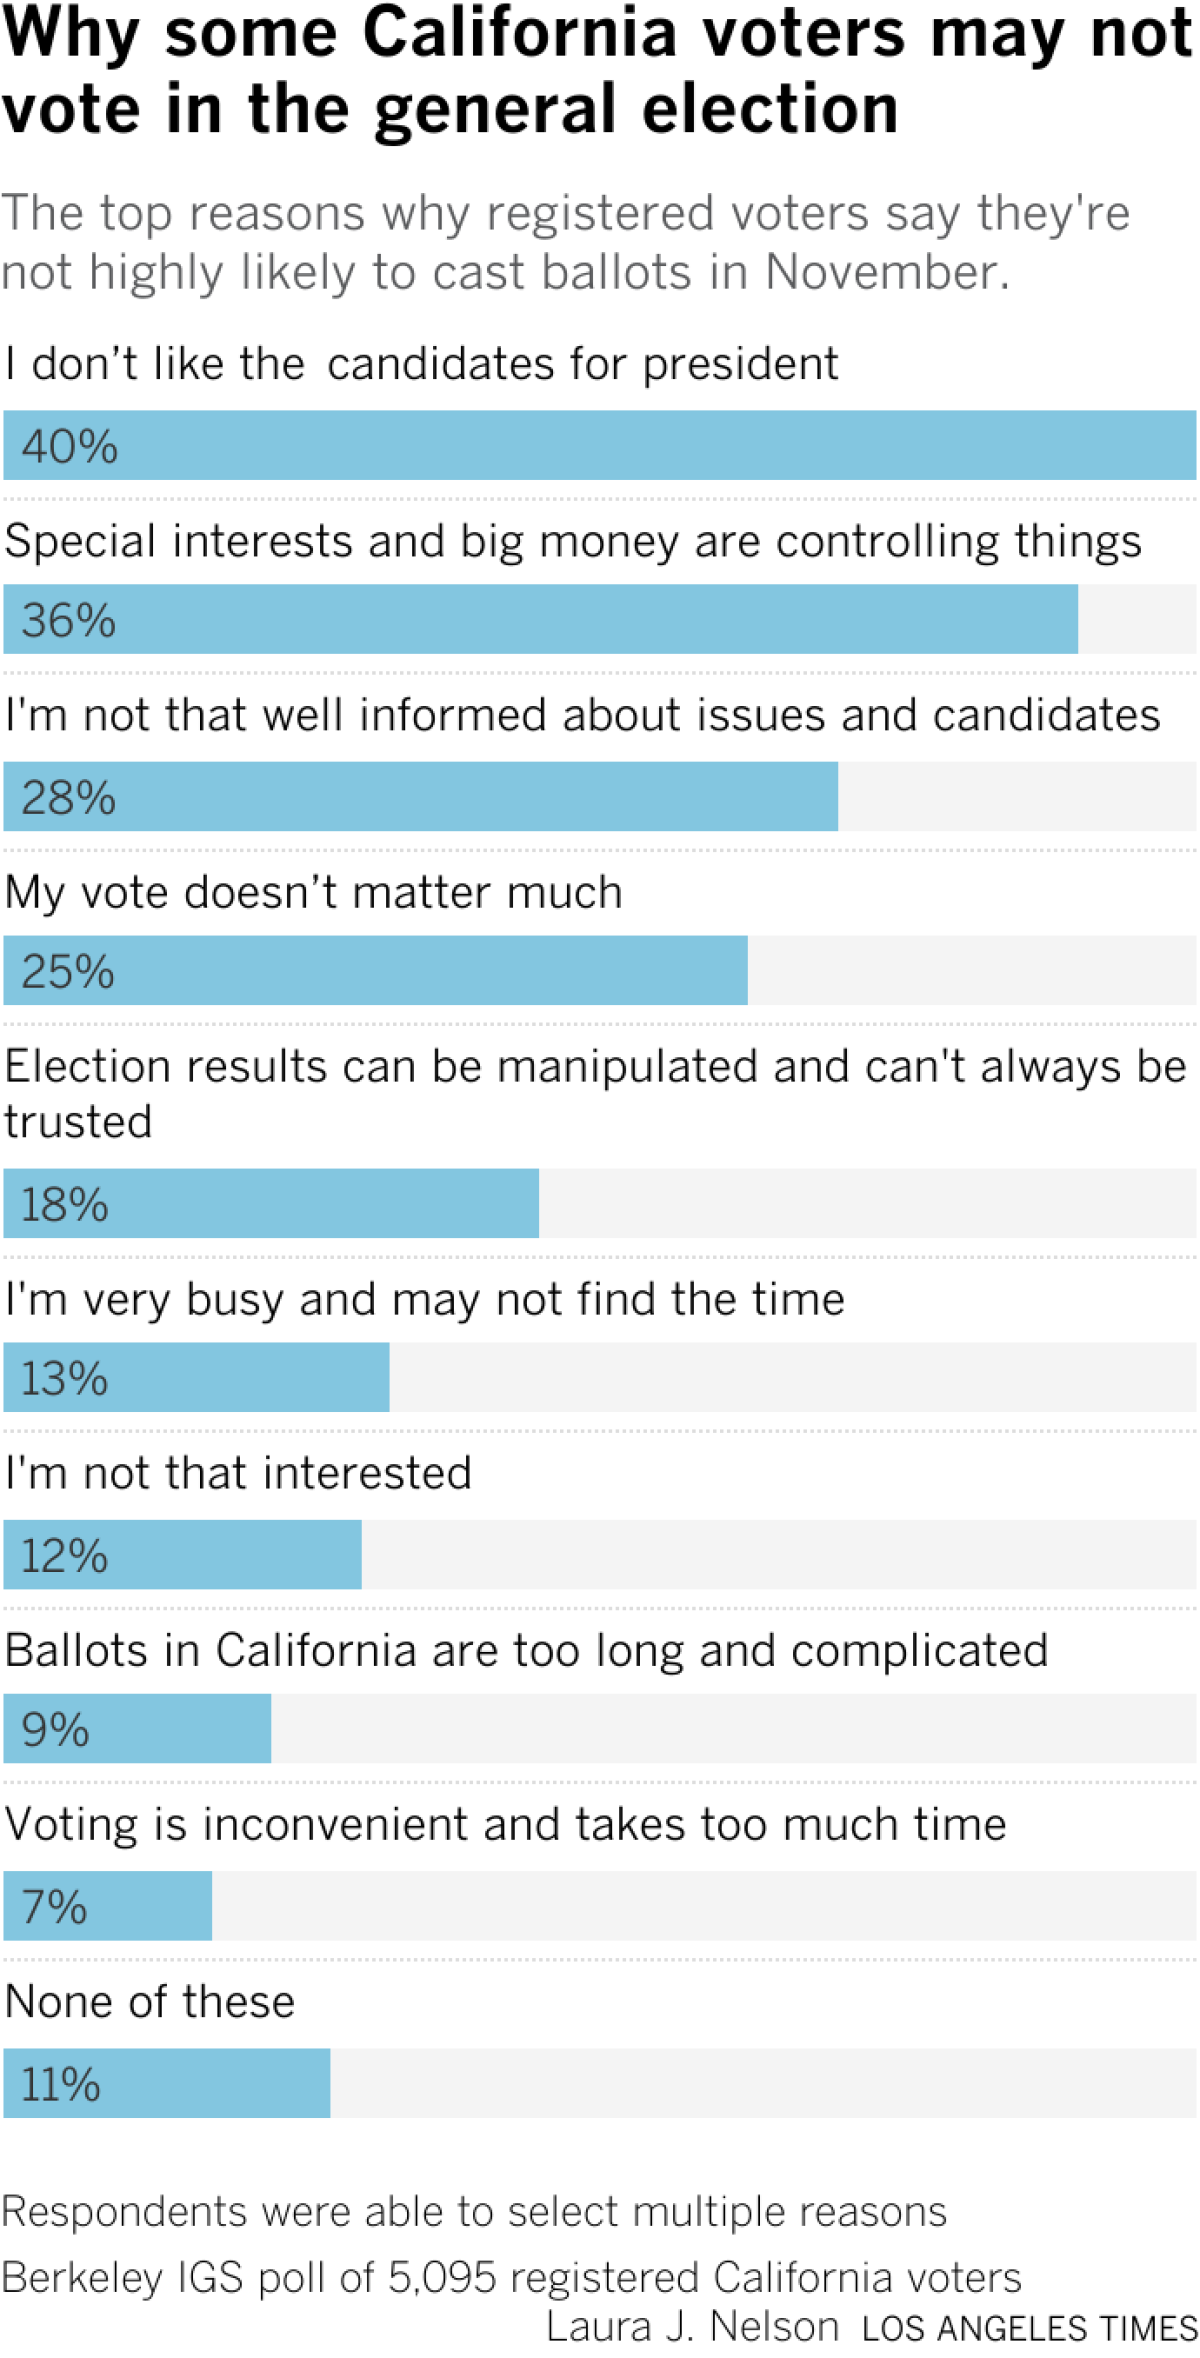 Below are the top reasons why registered voters say they are less likely to vote in November.